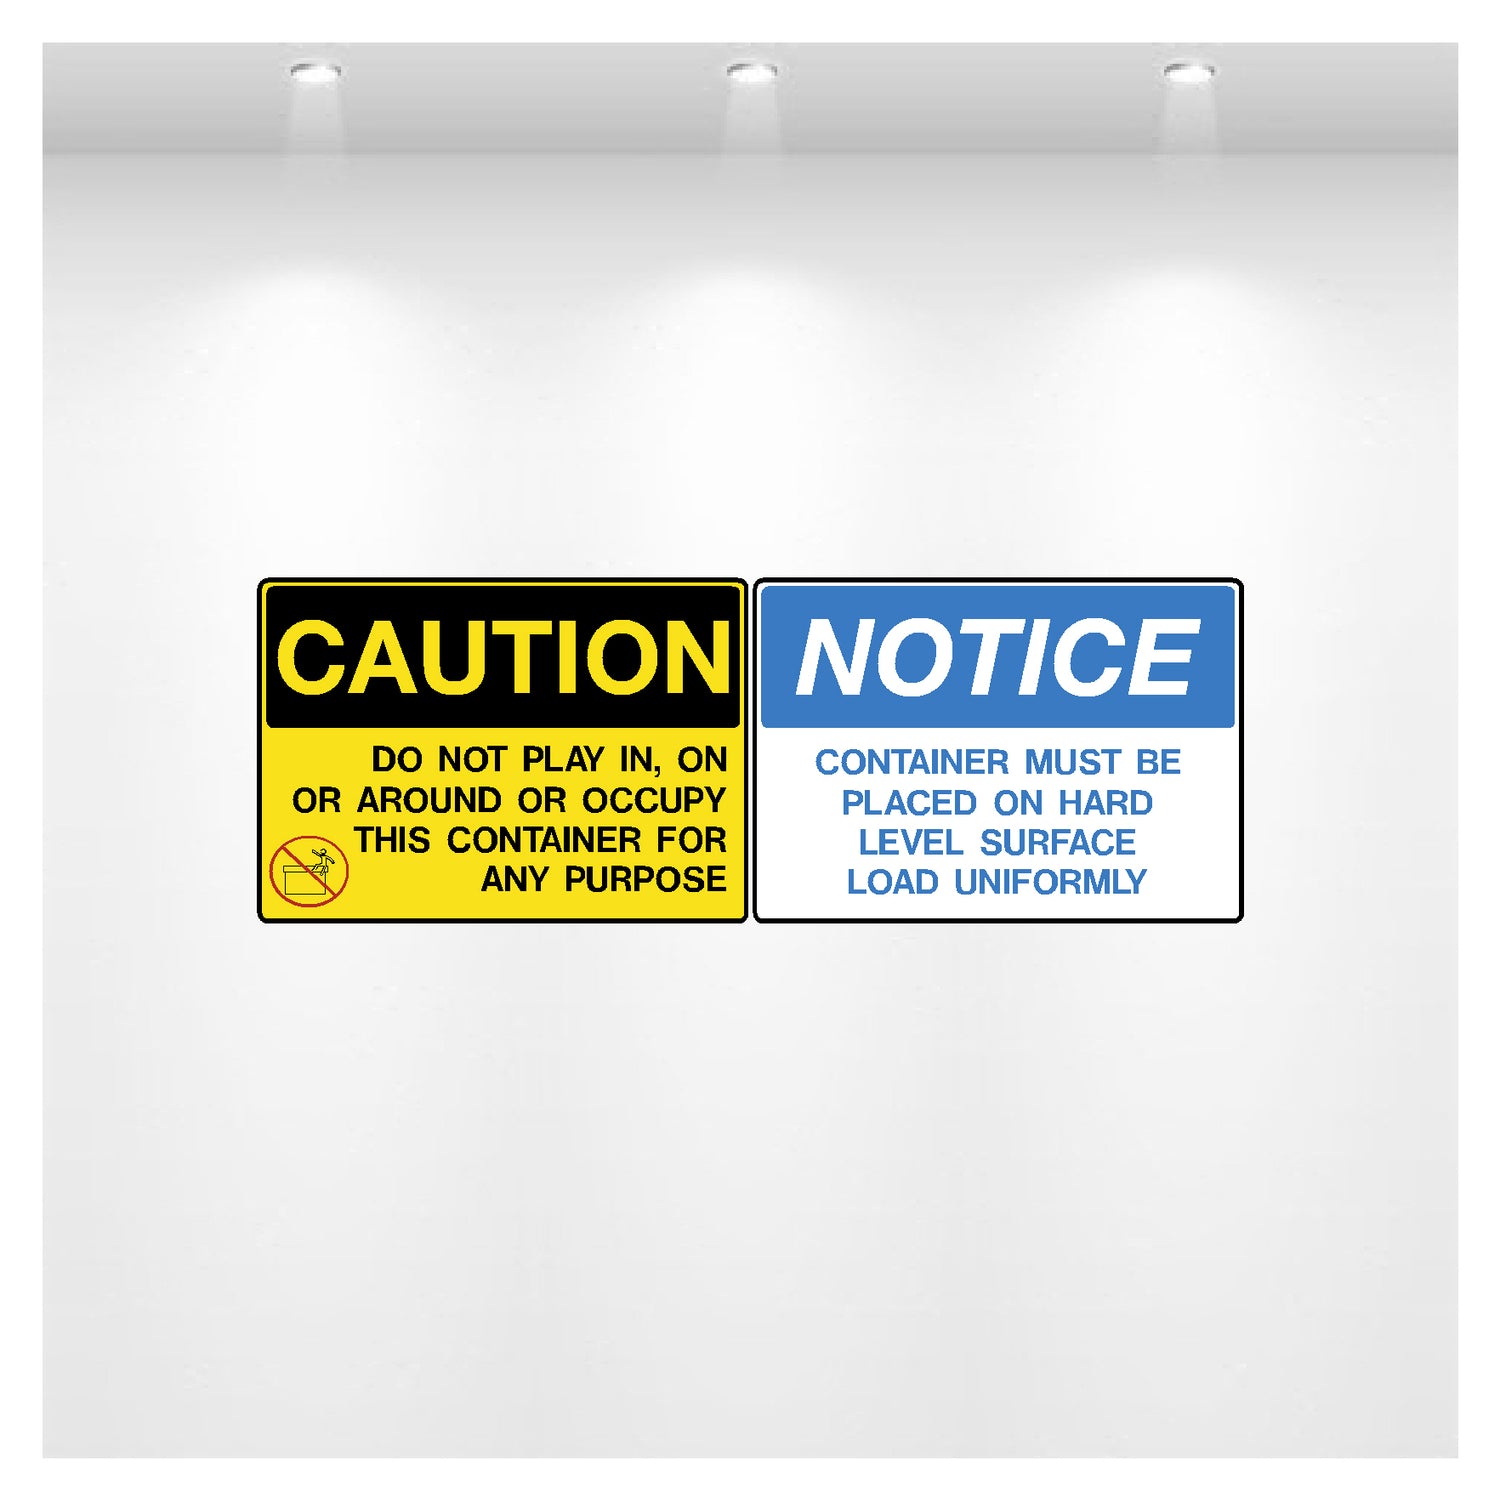 Decal - Caution Notice Roll Off Container Decal